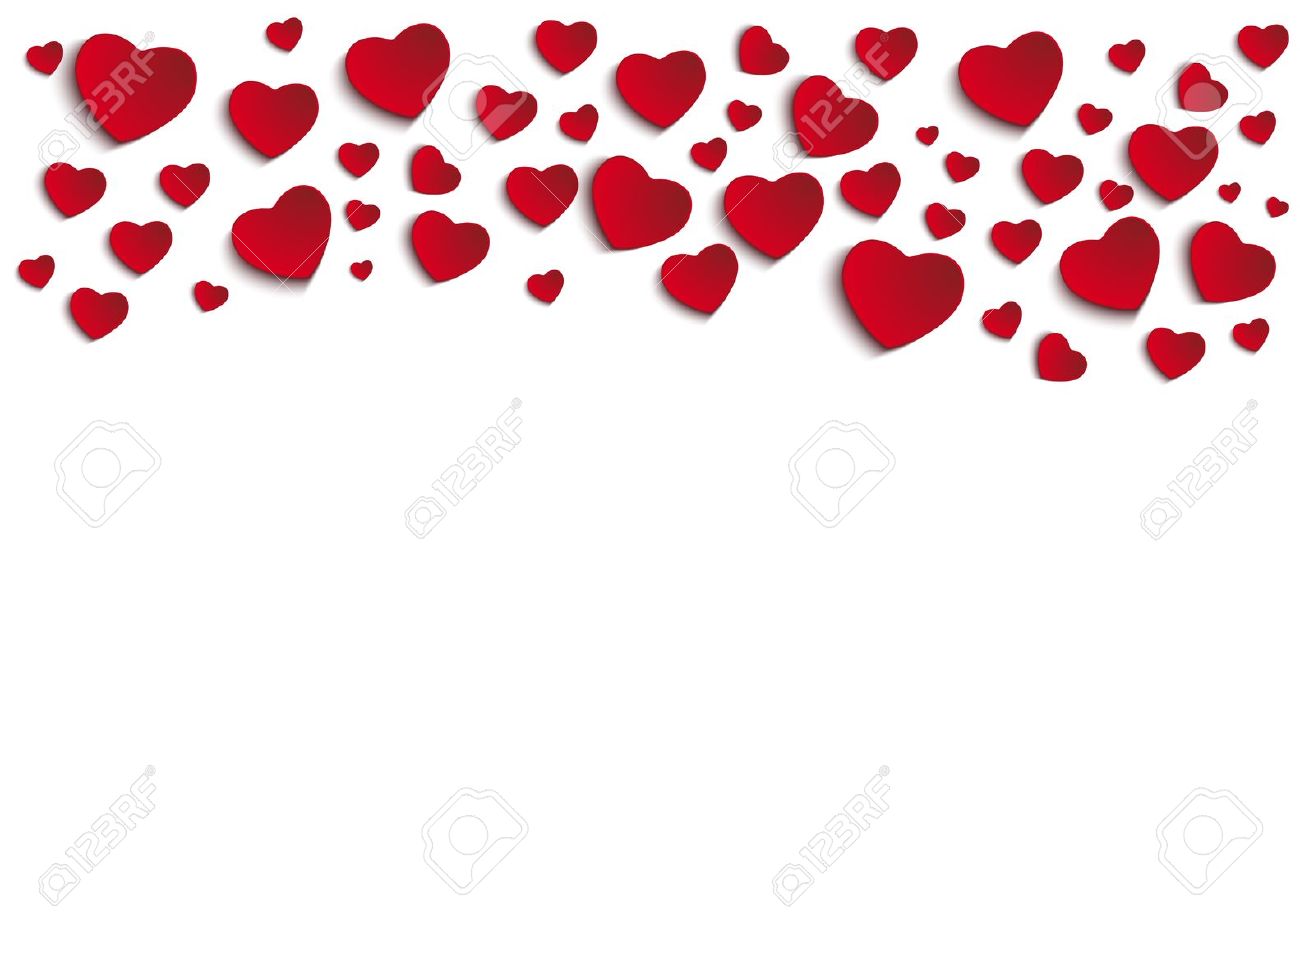 Free Printable Valentines Day Clipart at GetDrawings.com | Free for personal use Free ...